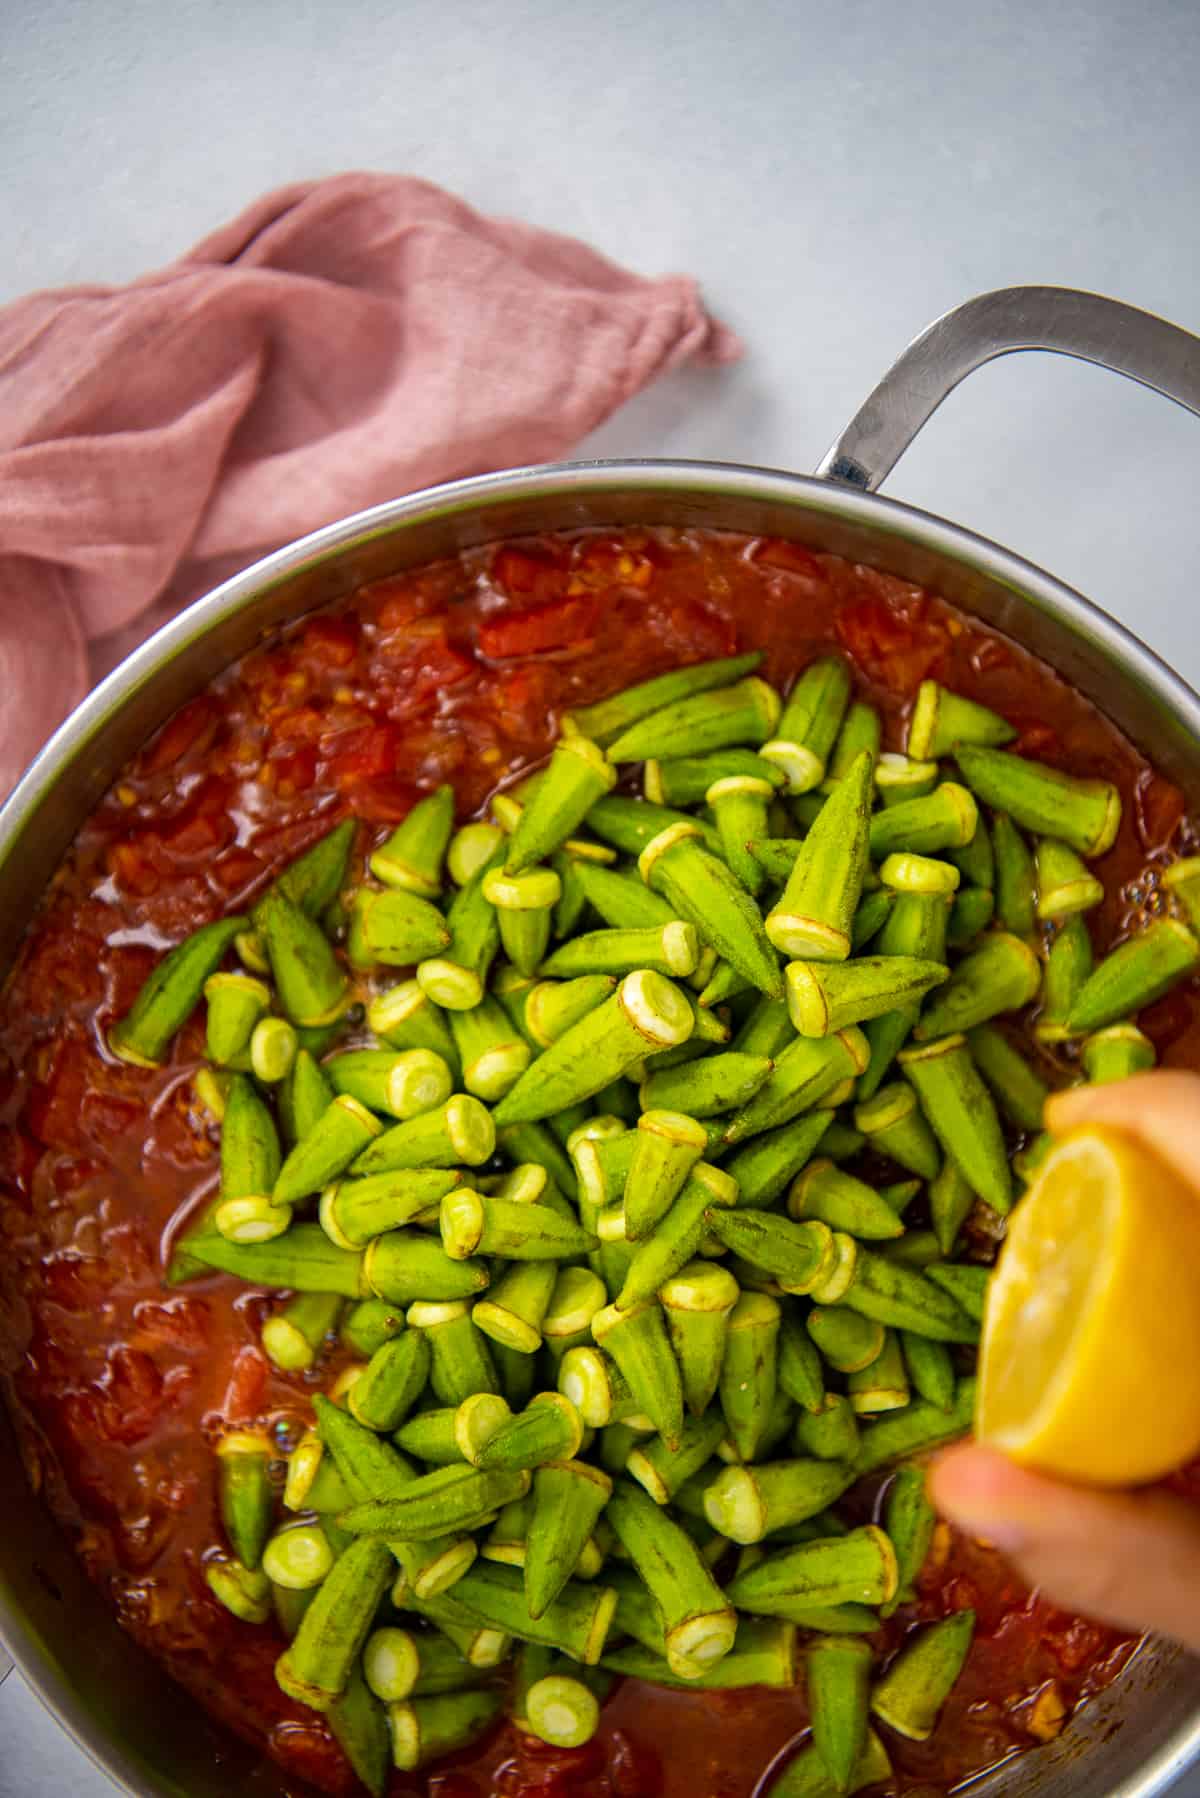 Fresh okra being cooked in a tomato sauce in a pan and hand squeezing lemon over it.